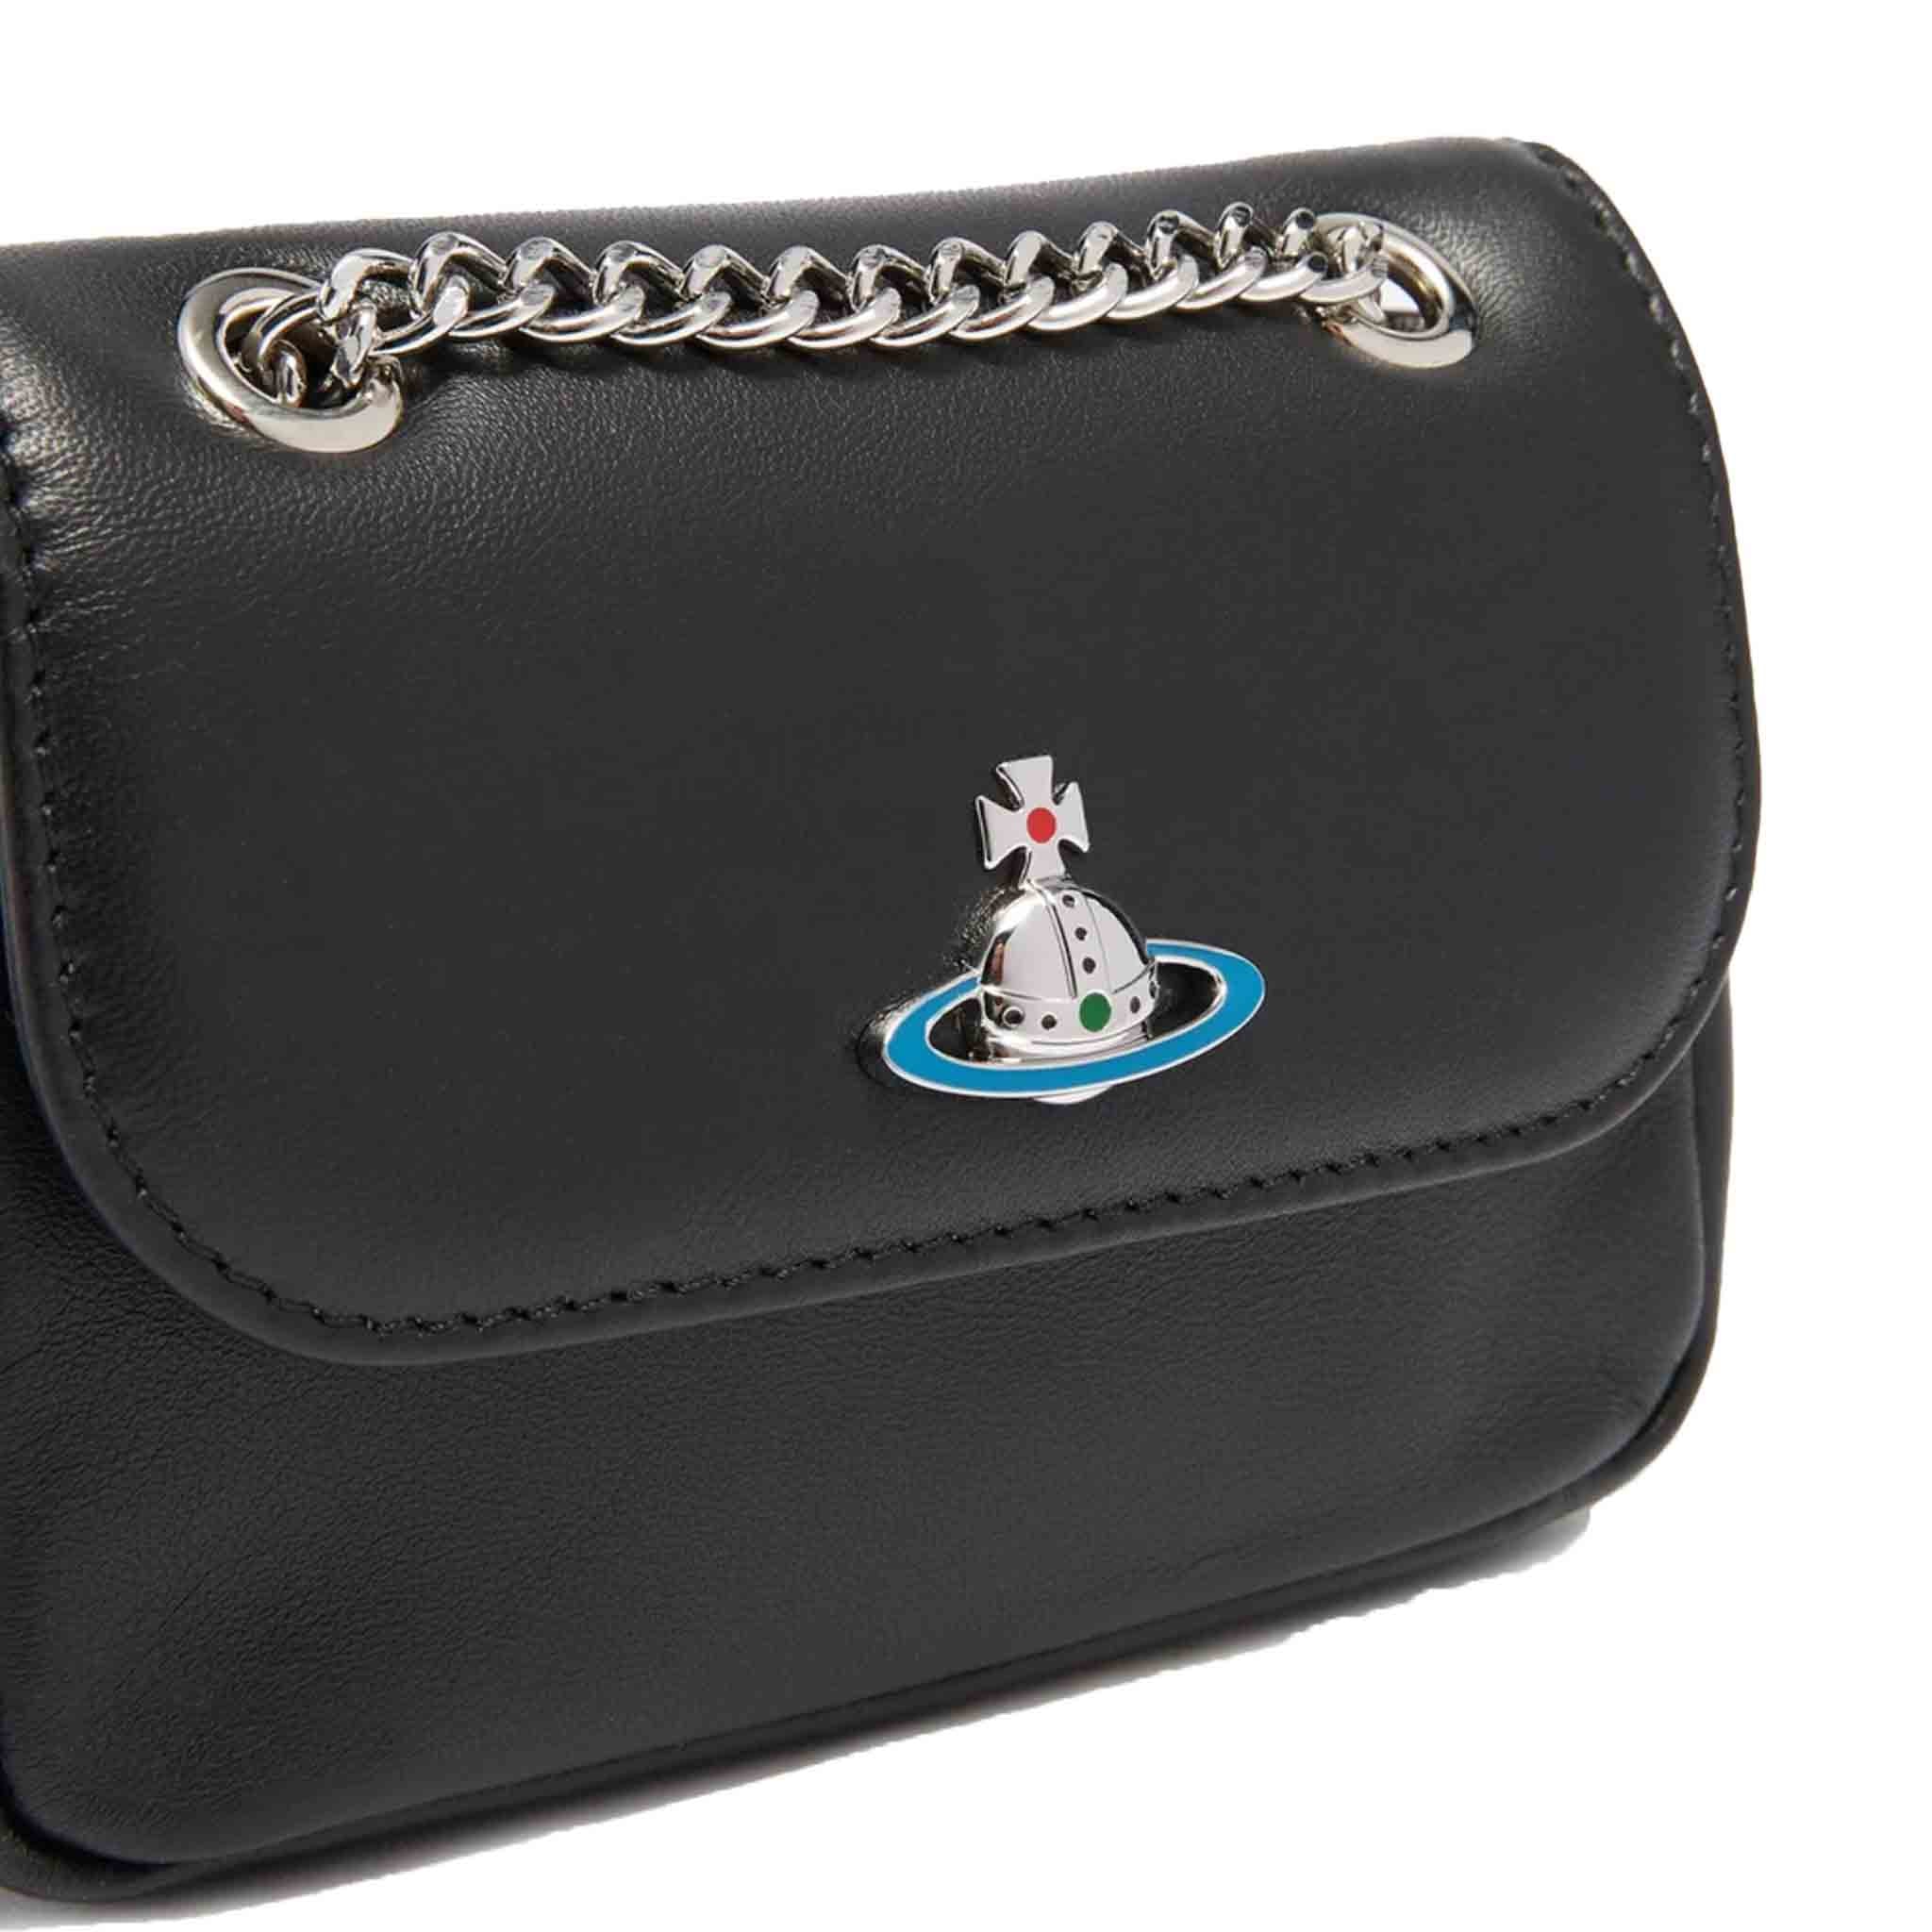 Vivienne Westwood Nappa Small Purse With Chain in Black